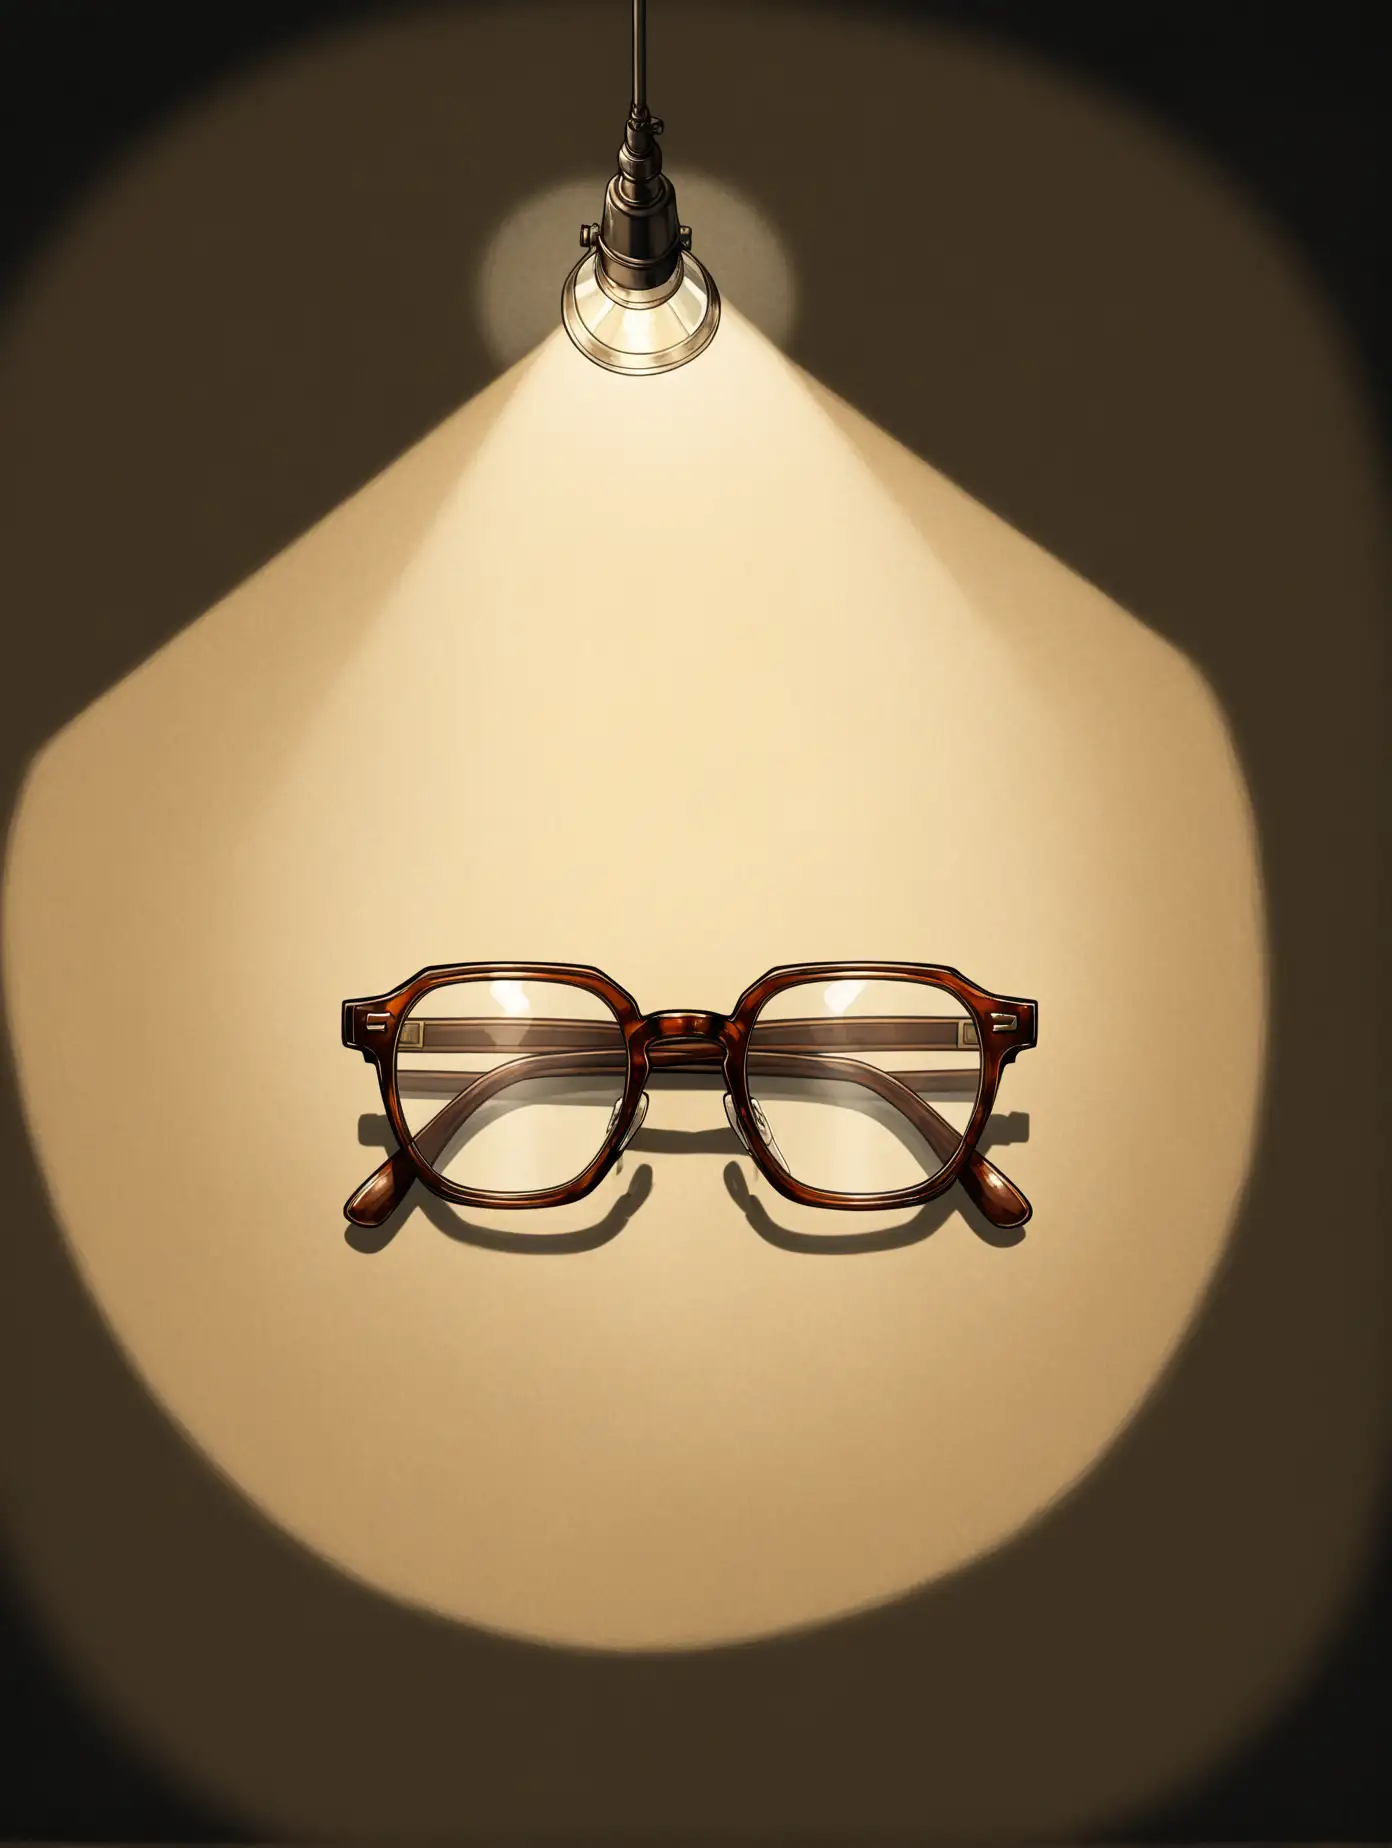 Old Fashioned Man with Glasses under Spotlight